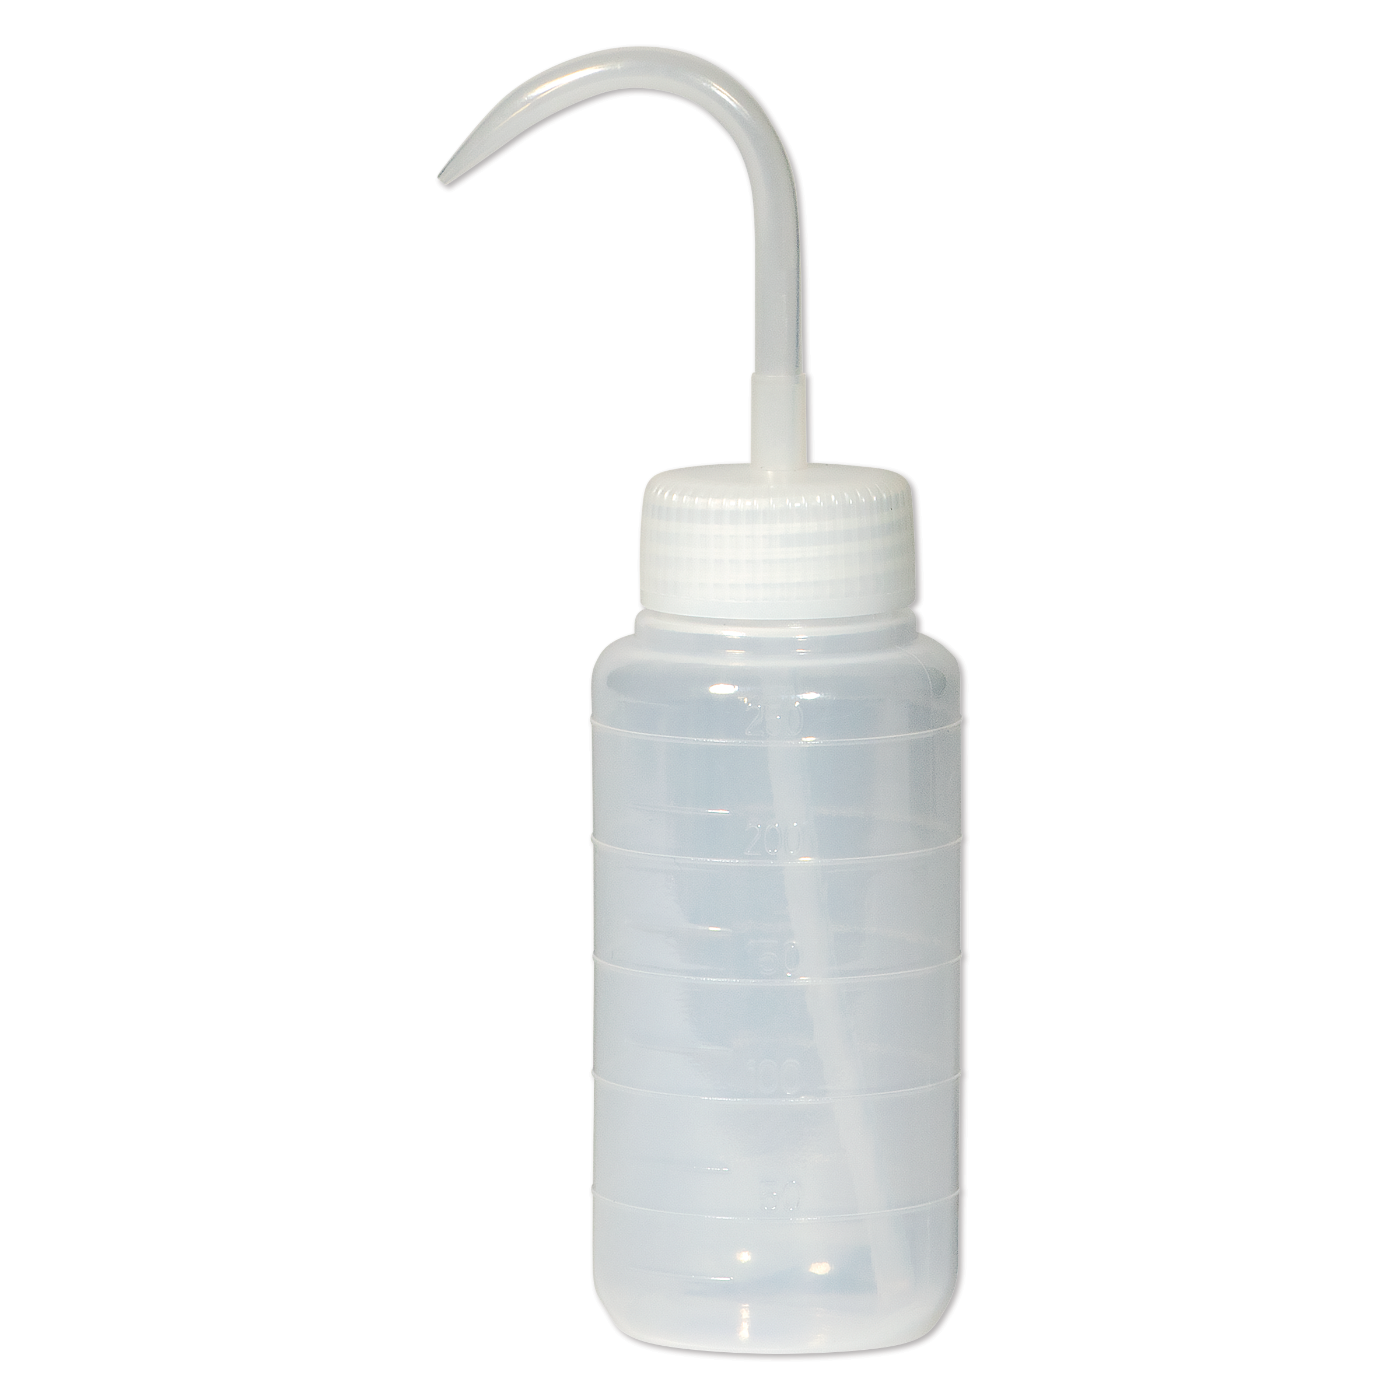 Squeezable Wash Bottle with nozzle, 8.5 oz., 250 mL